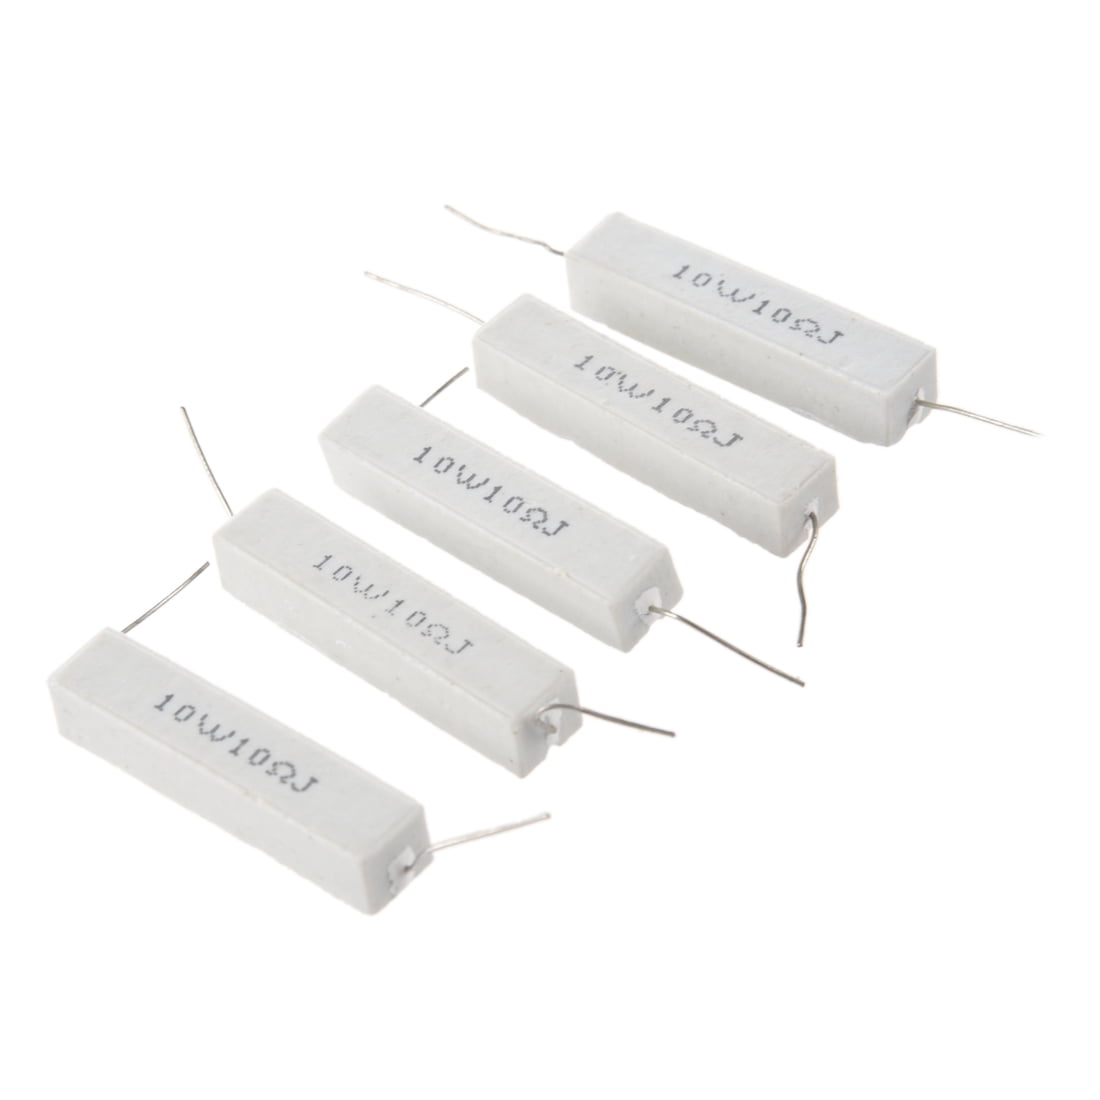 uxcell 10W 120 Ohm Power Resistor Ceramic Cement Resistor Axial Lead 10 Pcs White 